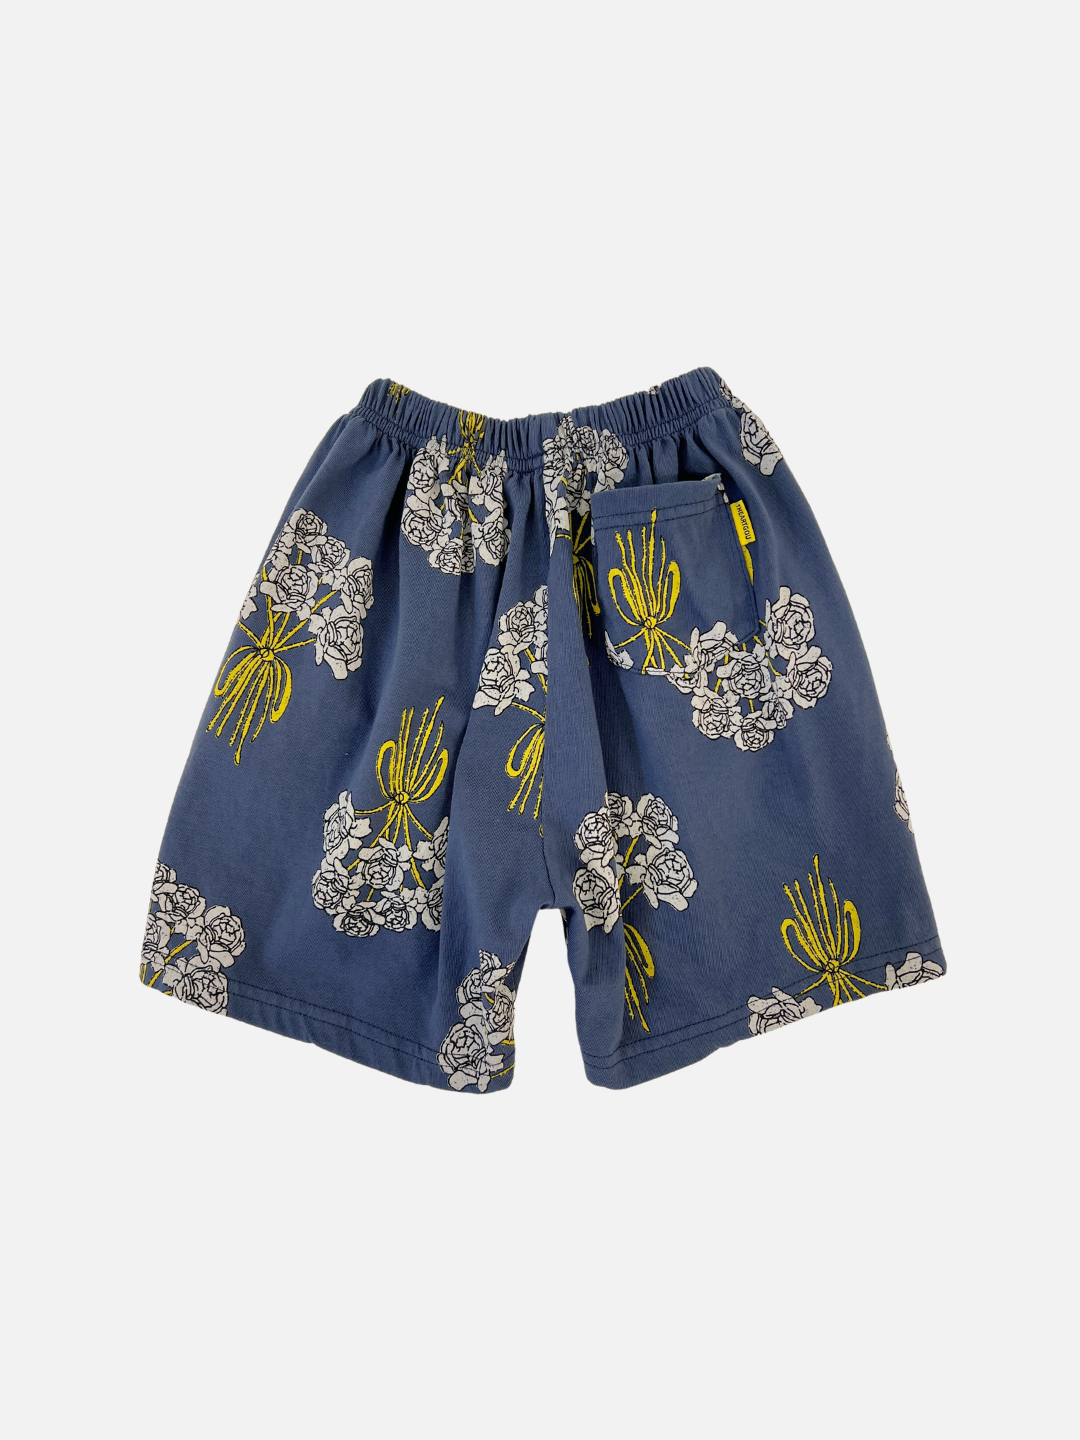 Navy | Back view of the kids' Bouquet Shorts. Navy cotton fabric with an all-over white roses bouquet print. Back pocket on the right side.